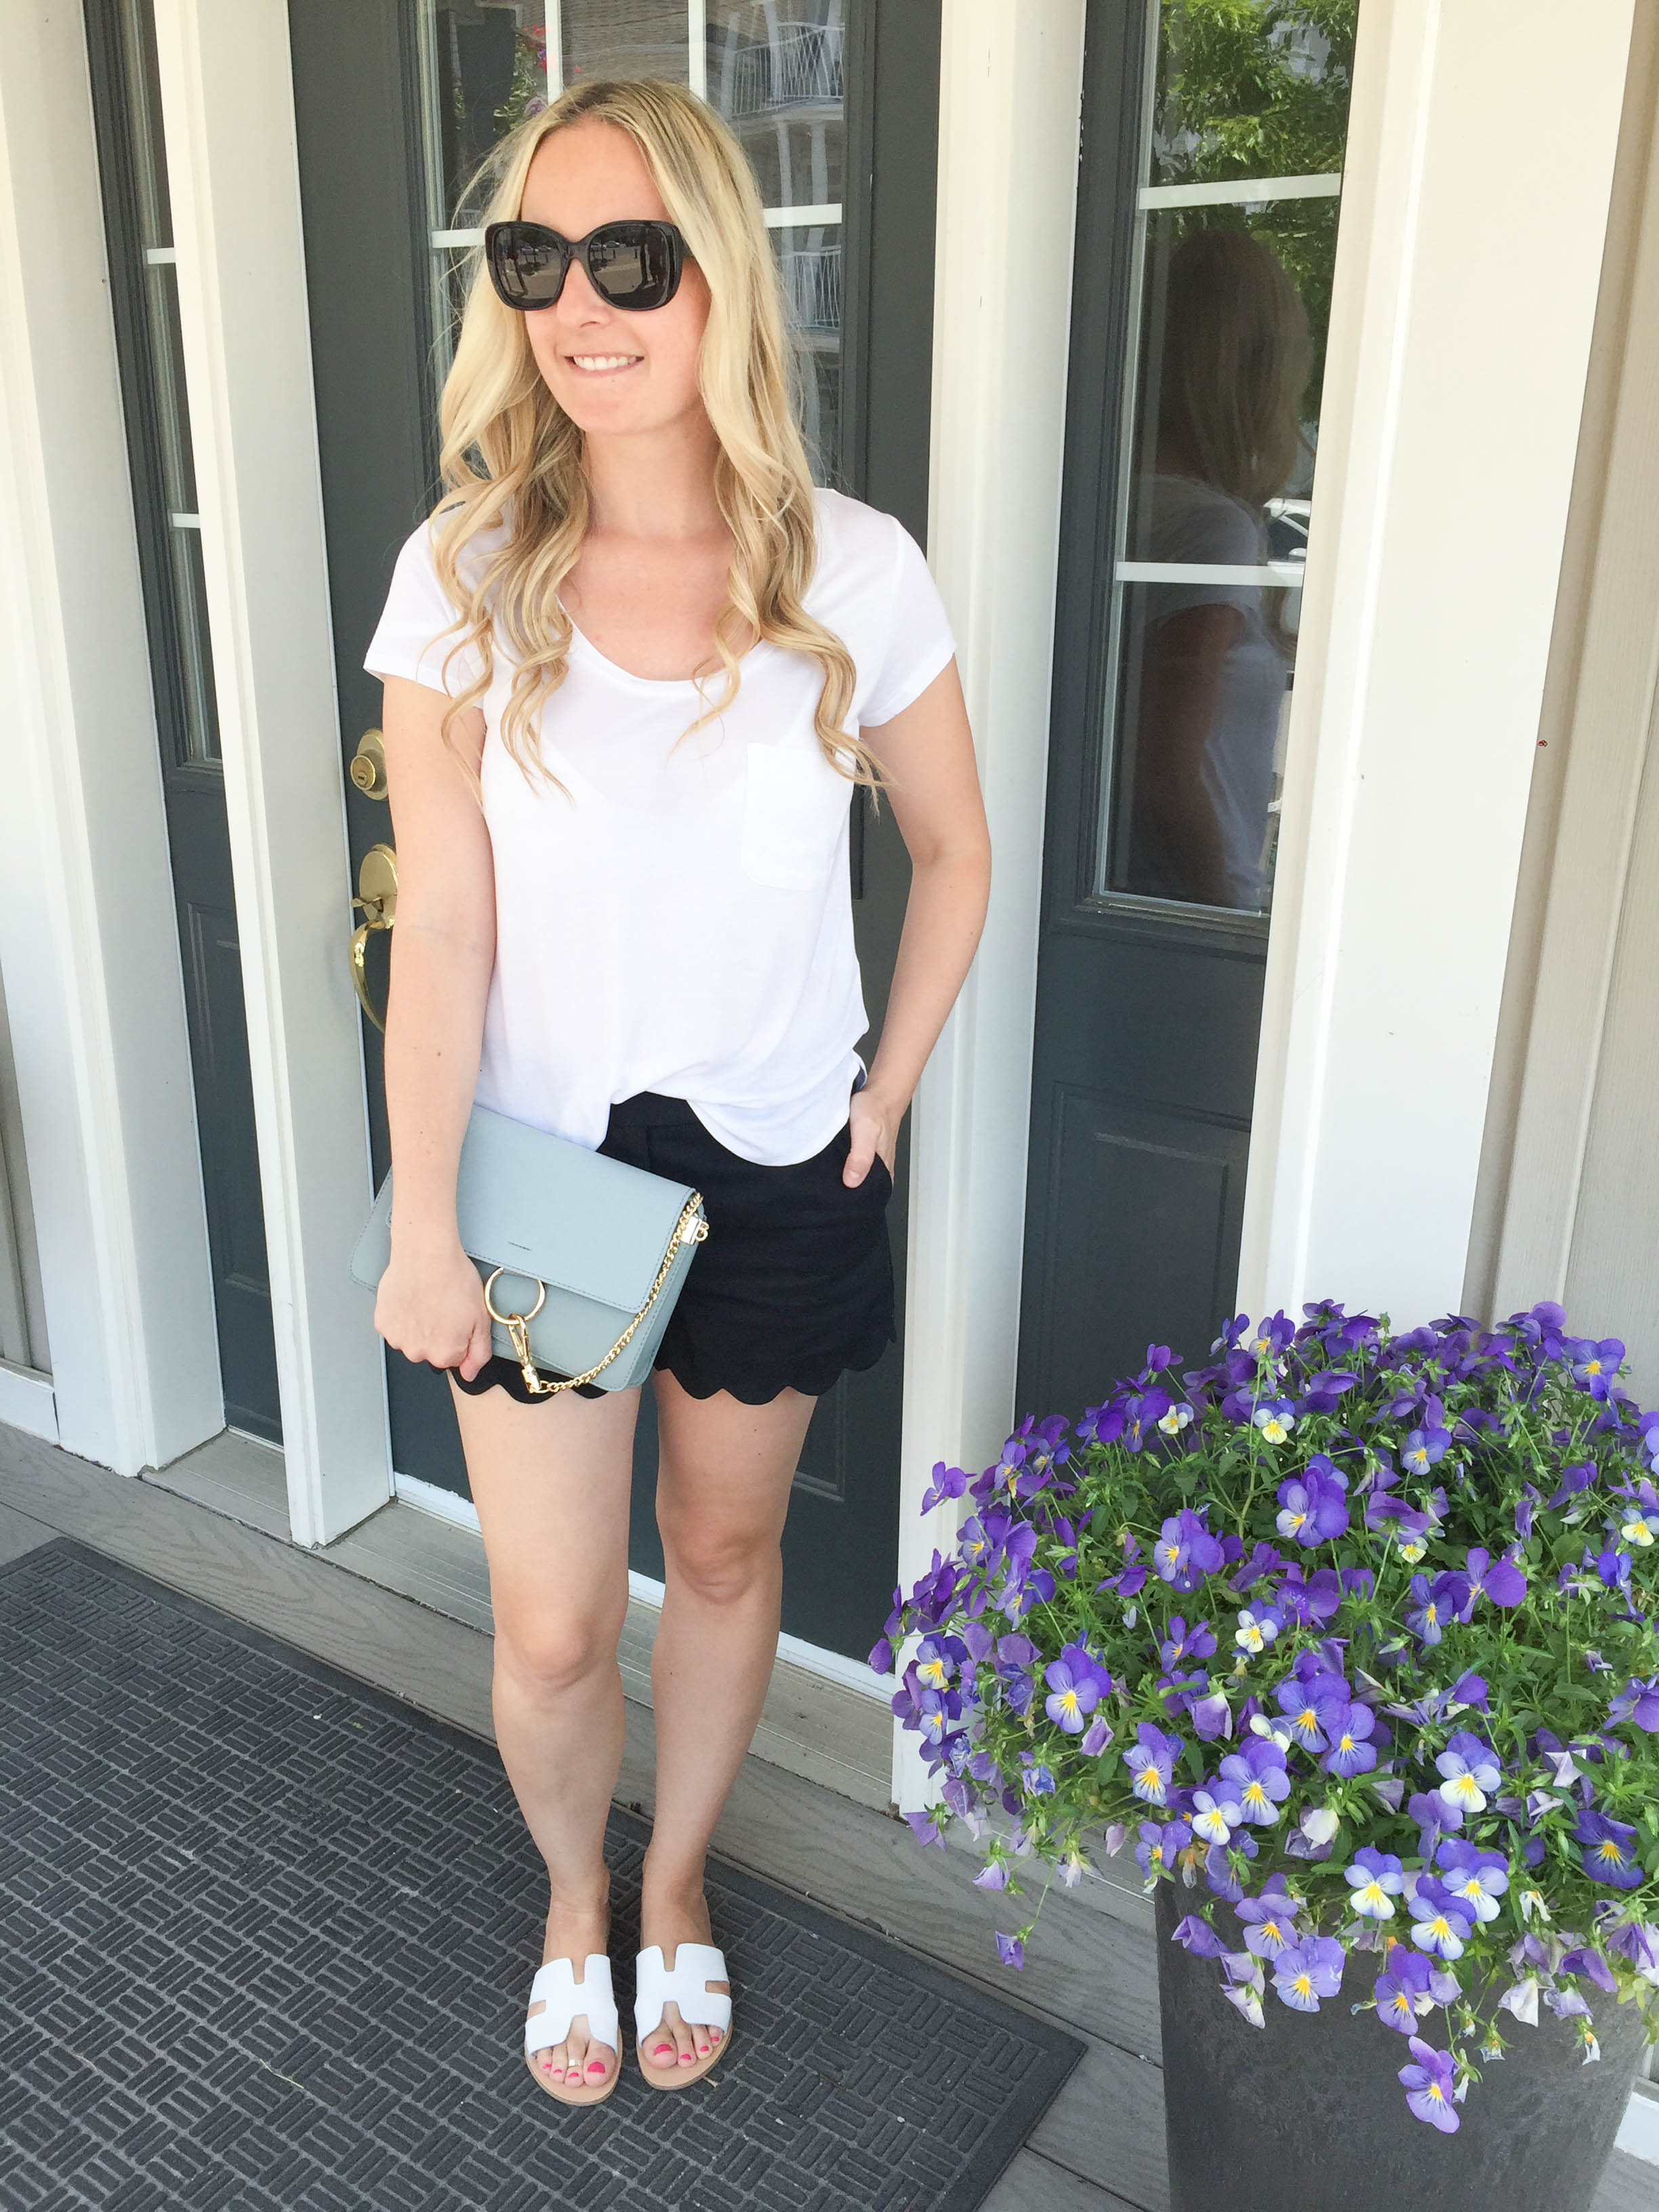 scalloped shorts from J Crew